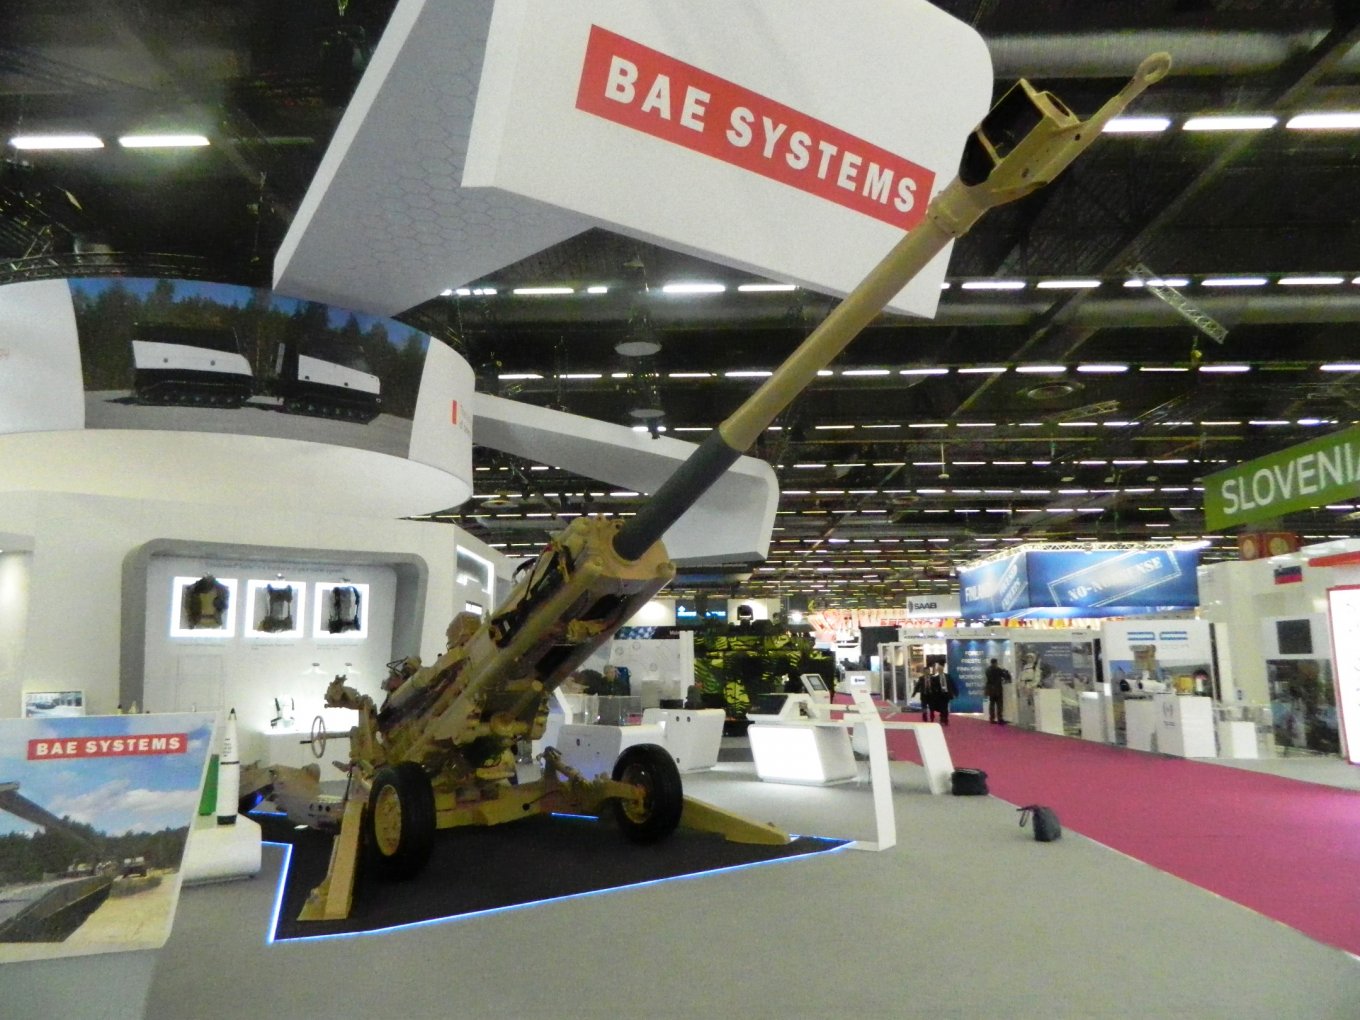 M777 towed howitzer, projectiles presented by BAE Systems on Eurosatory-2018 defense exhibition in Paris, Valerii Riabykh, Defense Express